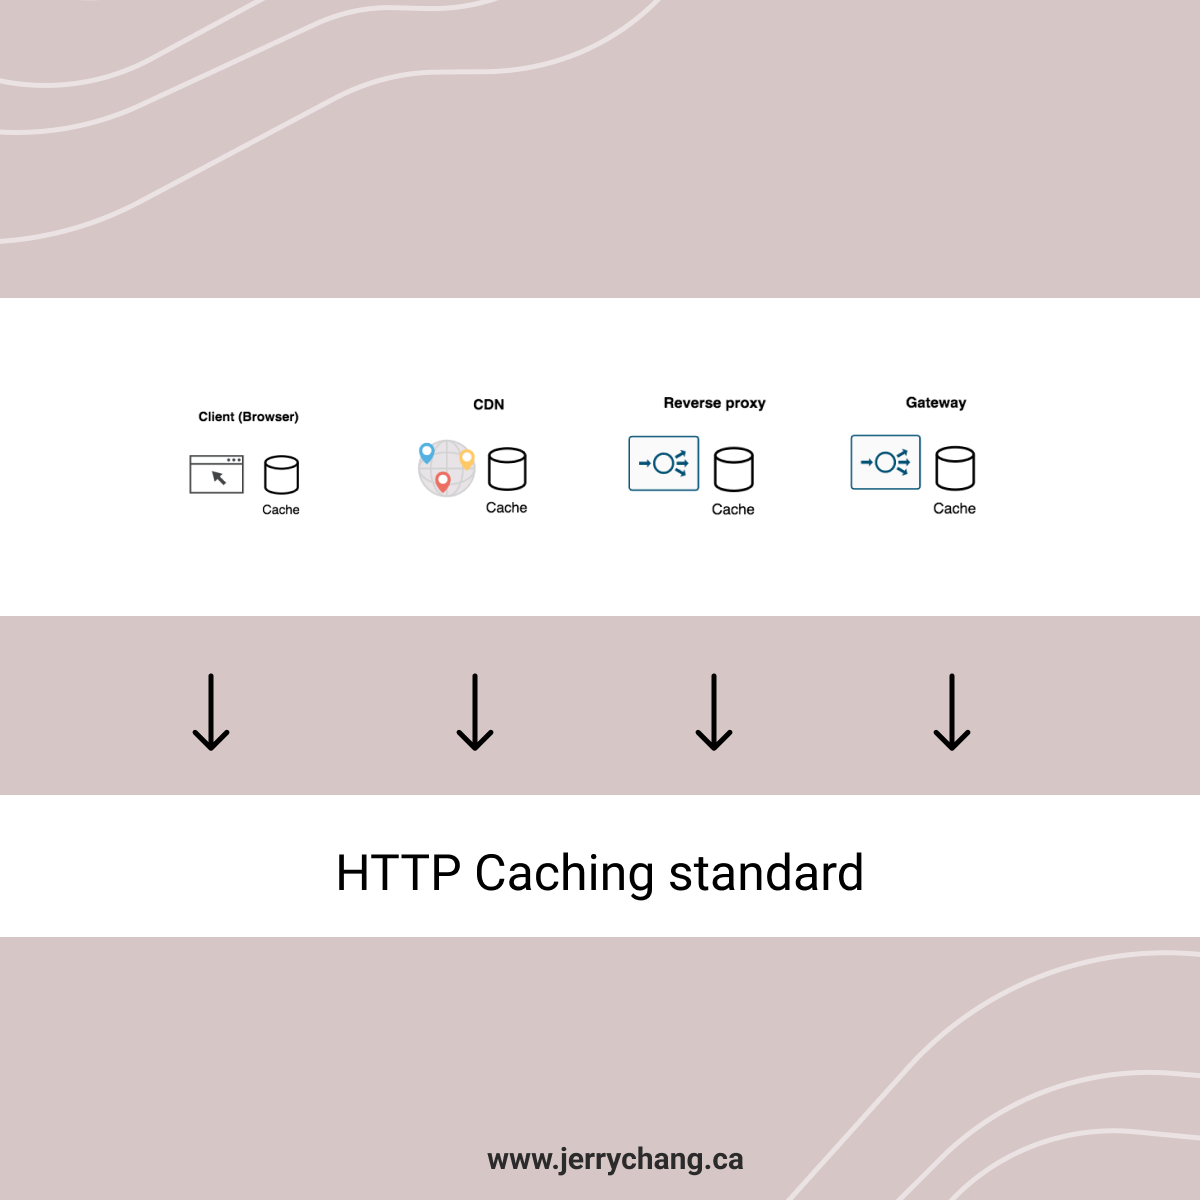 Illustration of common software tools built on the HTTP caching standard